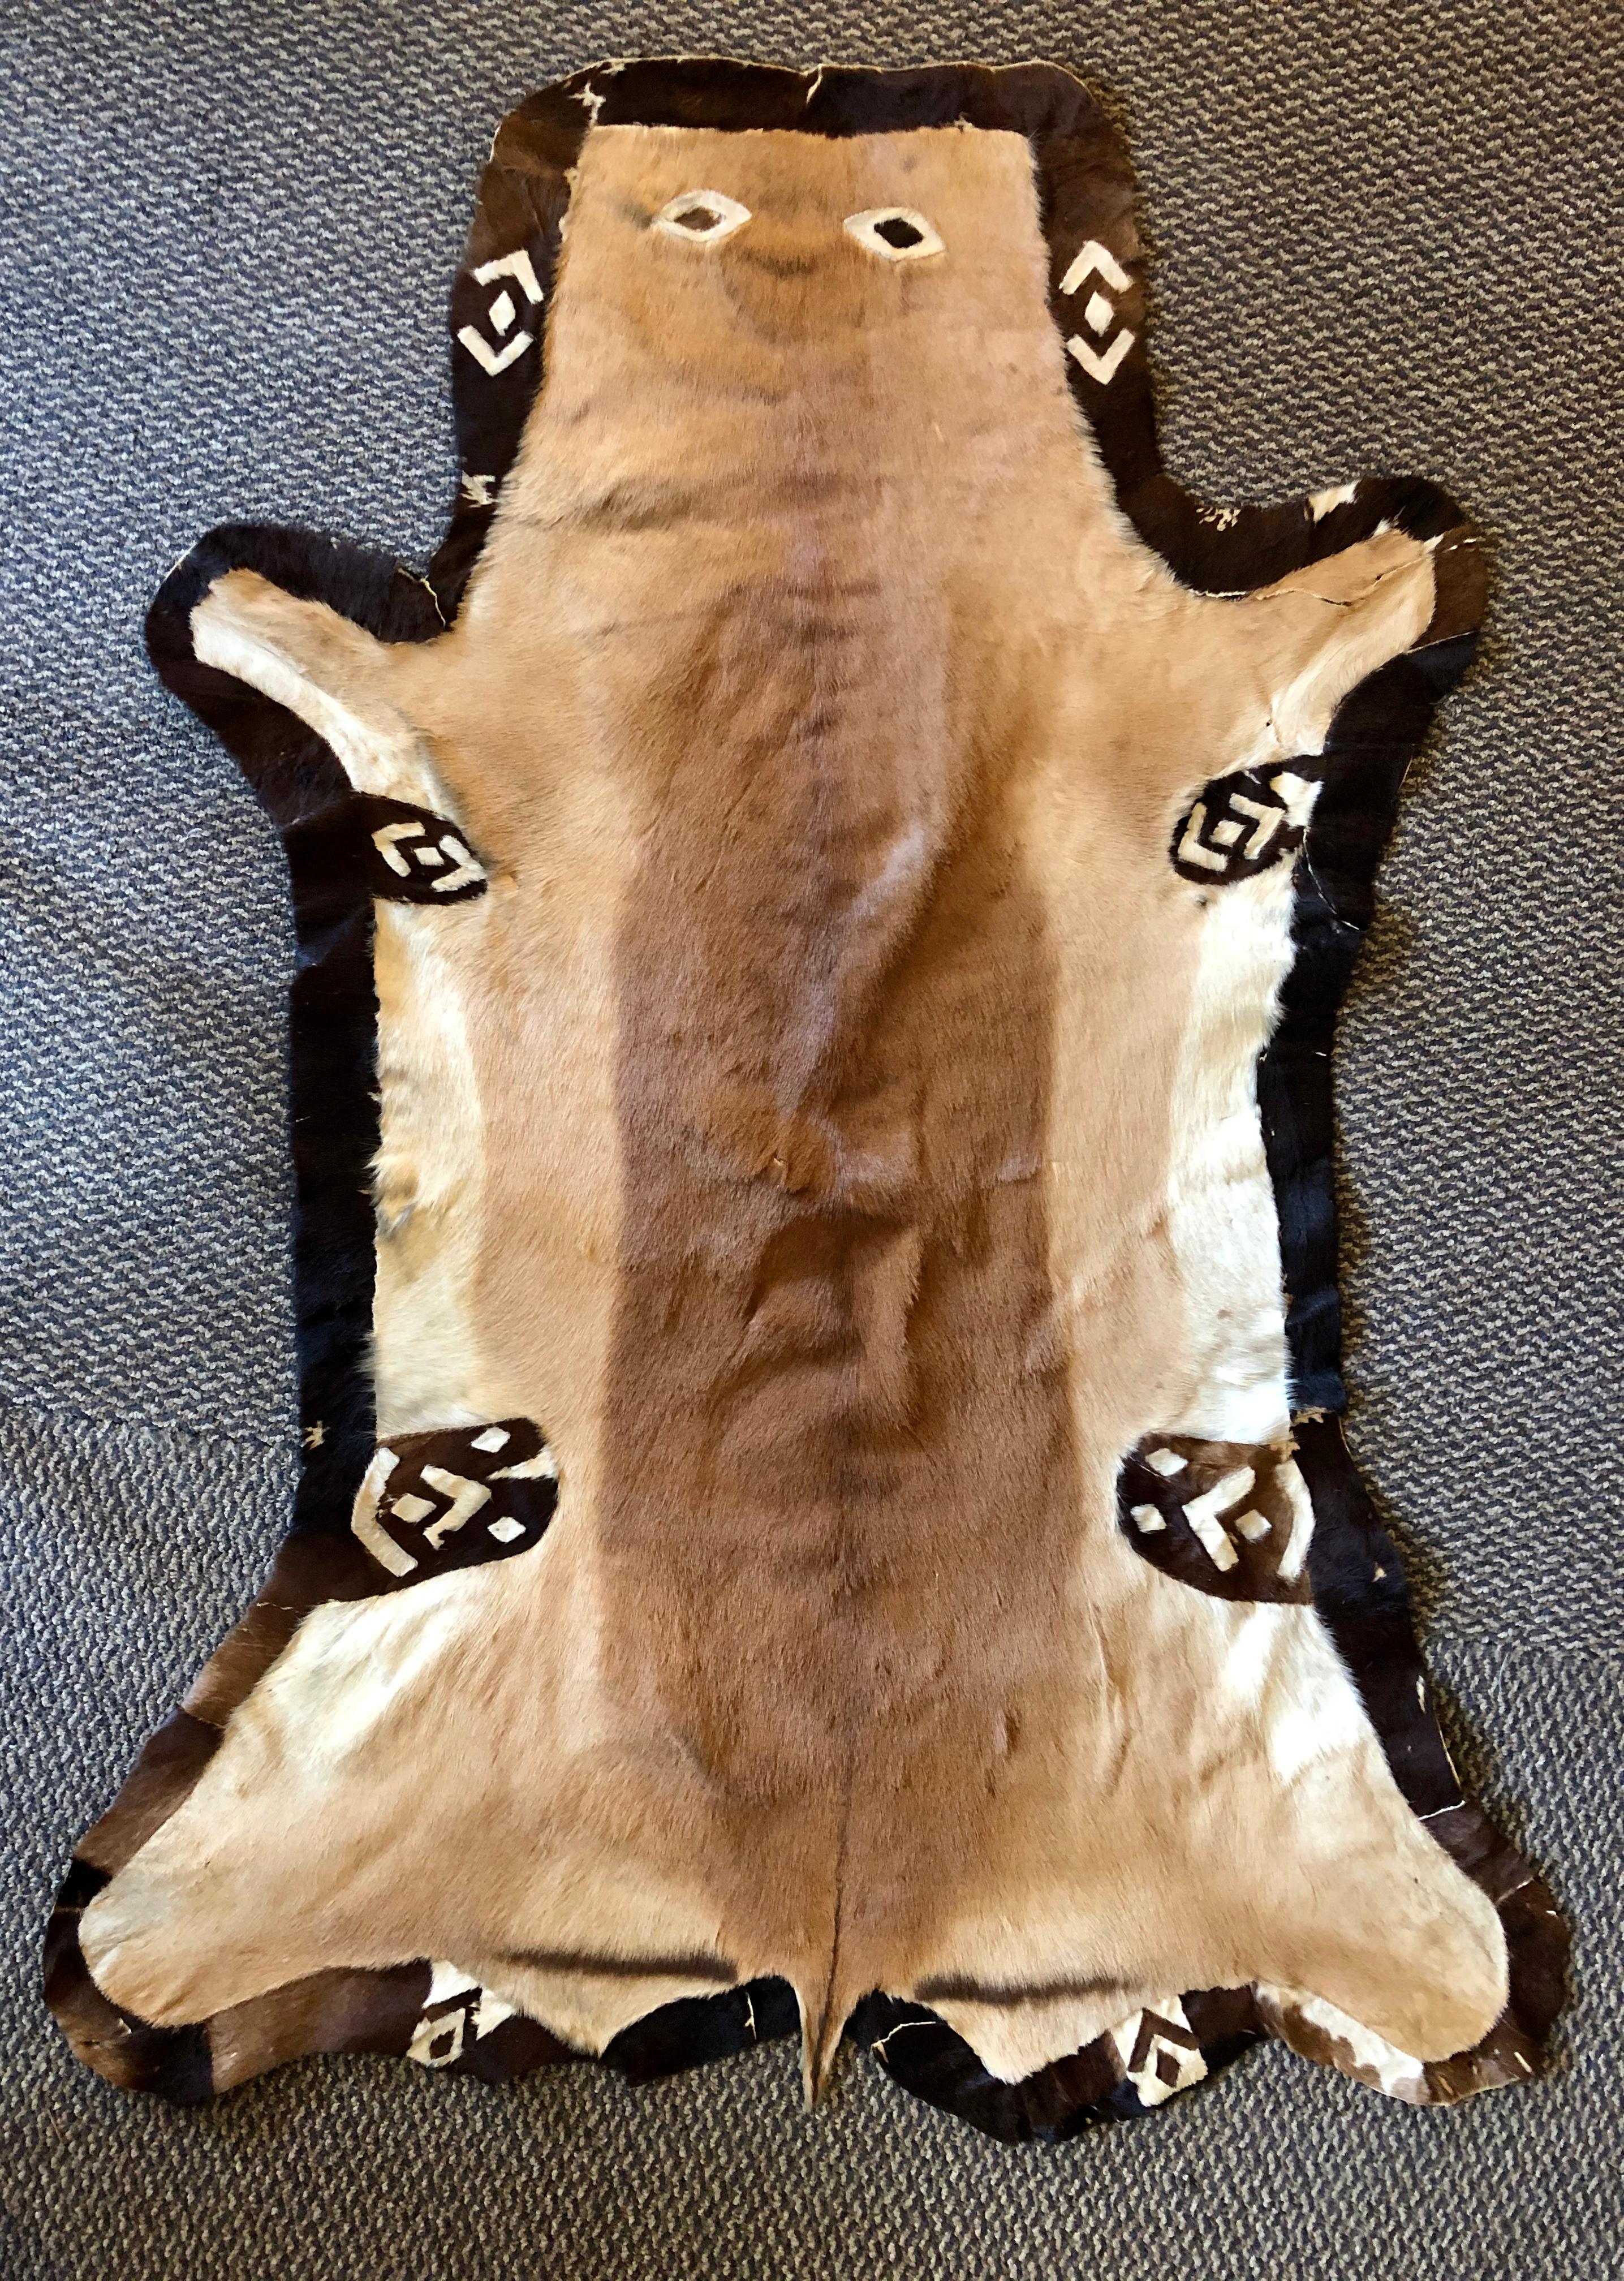 20th Century Stitch Animal Skin Rug or Carpet with a Happy Face